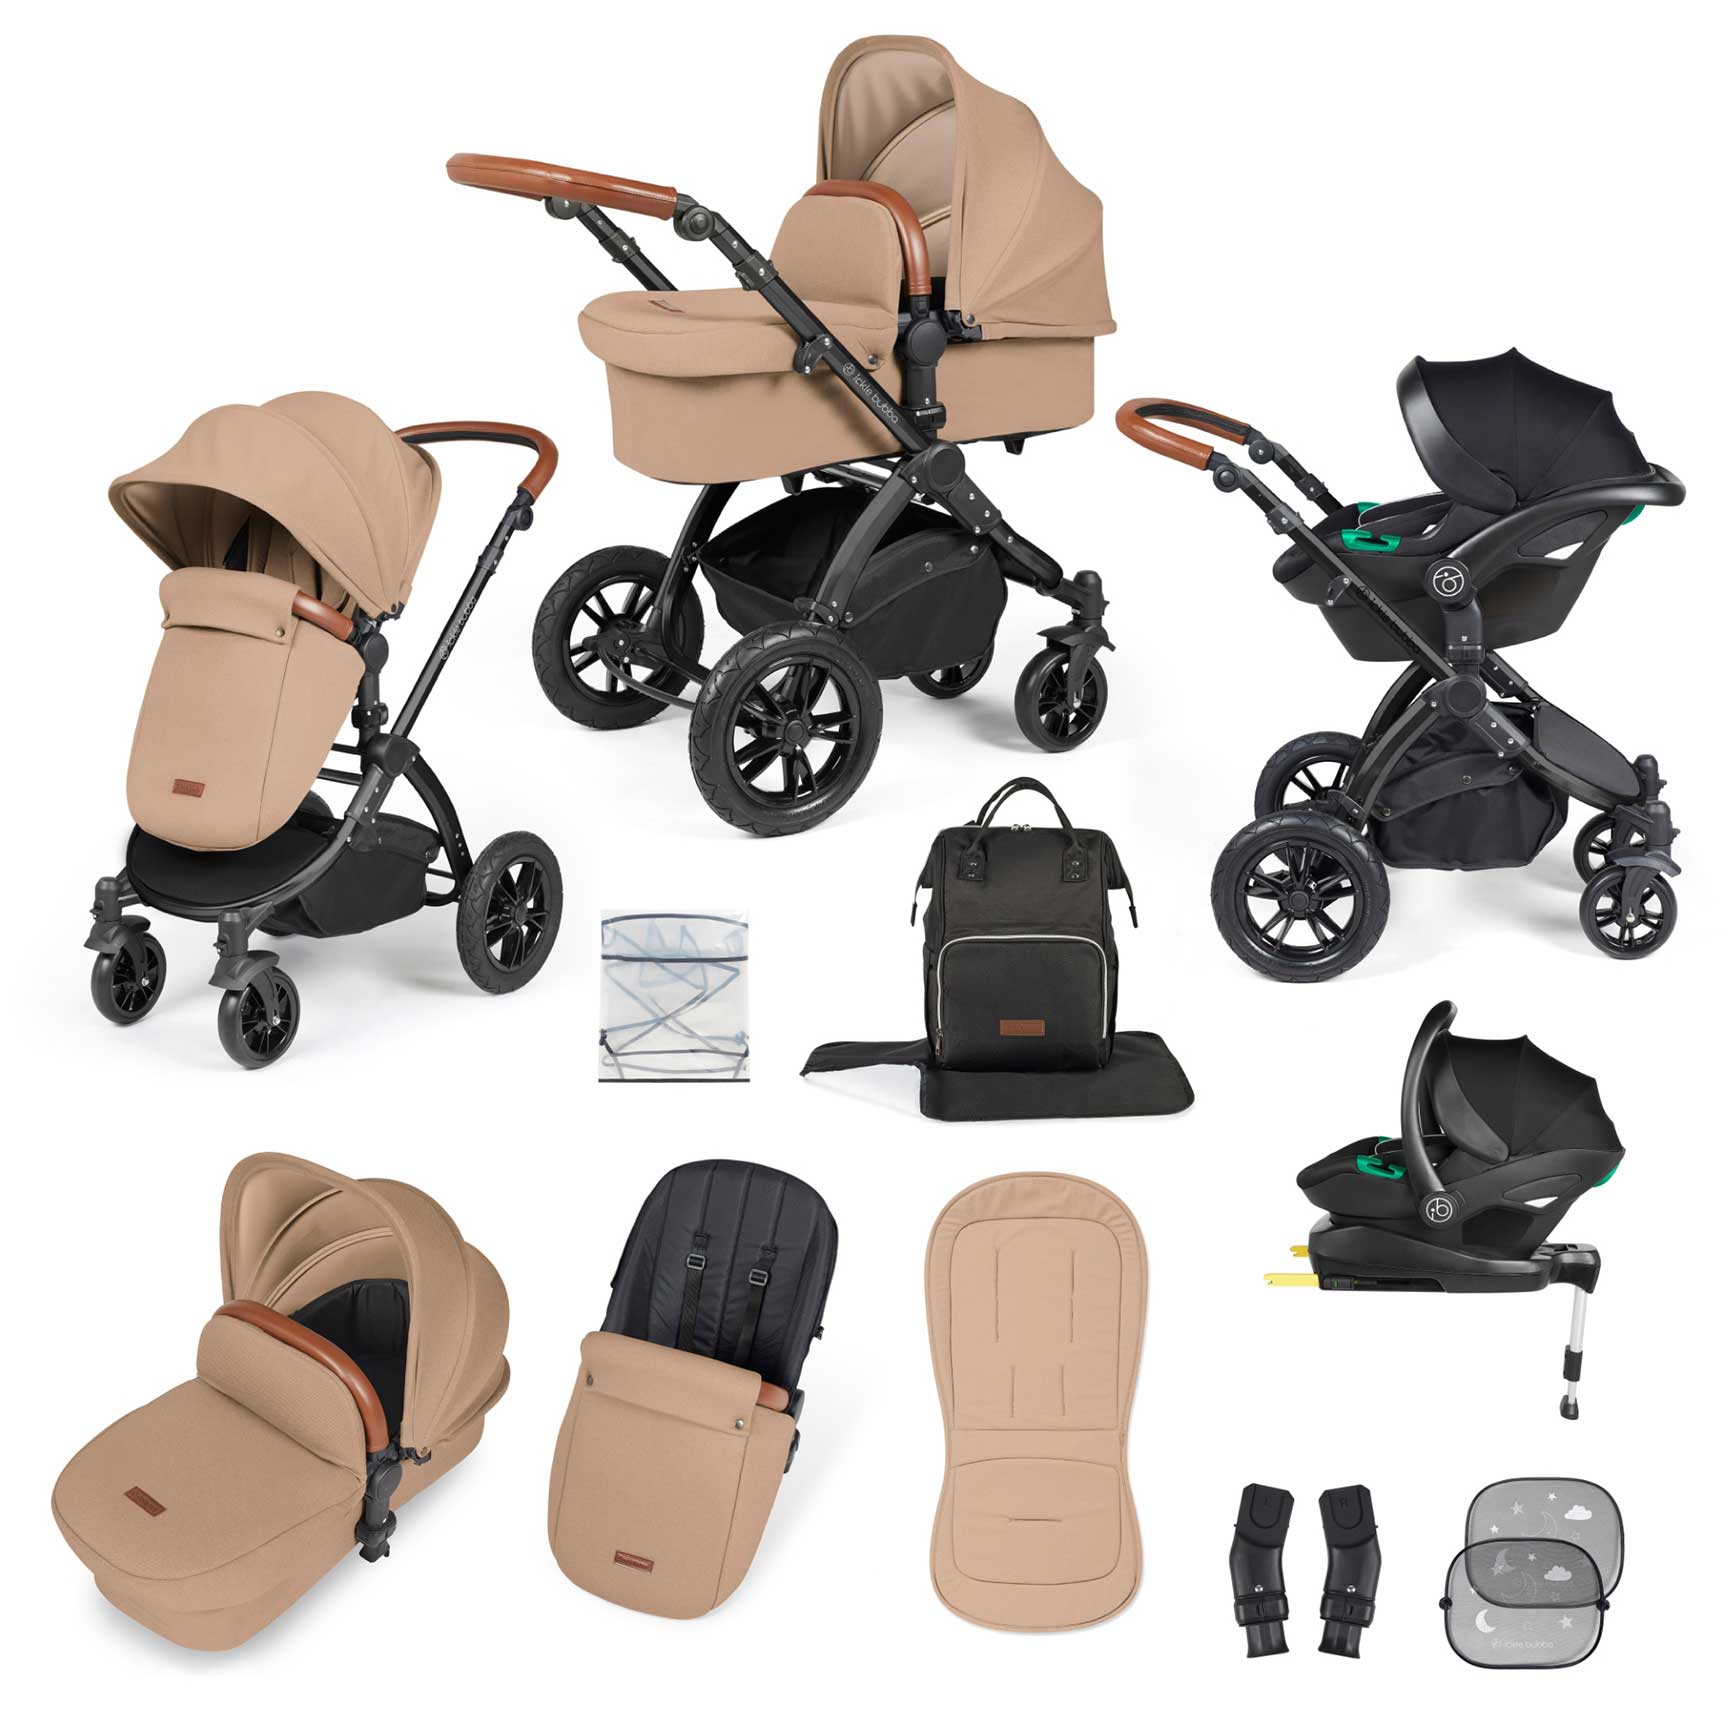 Ickle Bubba travel systems Ickle Bubba Stomp Luxe All-in-One Travel System with Isofix Base - Black/Desert/Tan 10-011-300-209